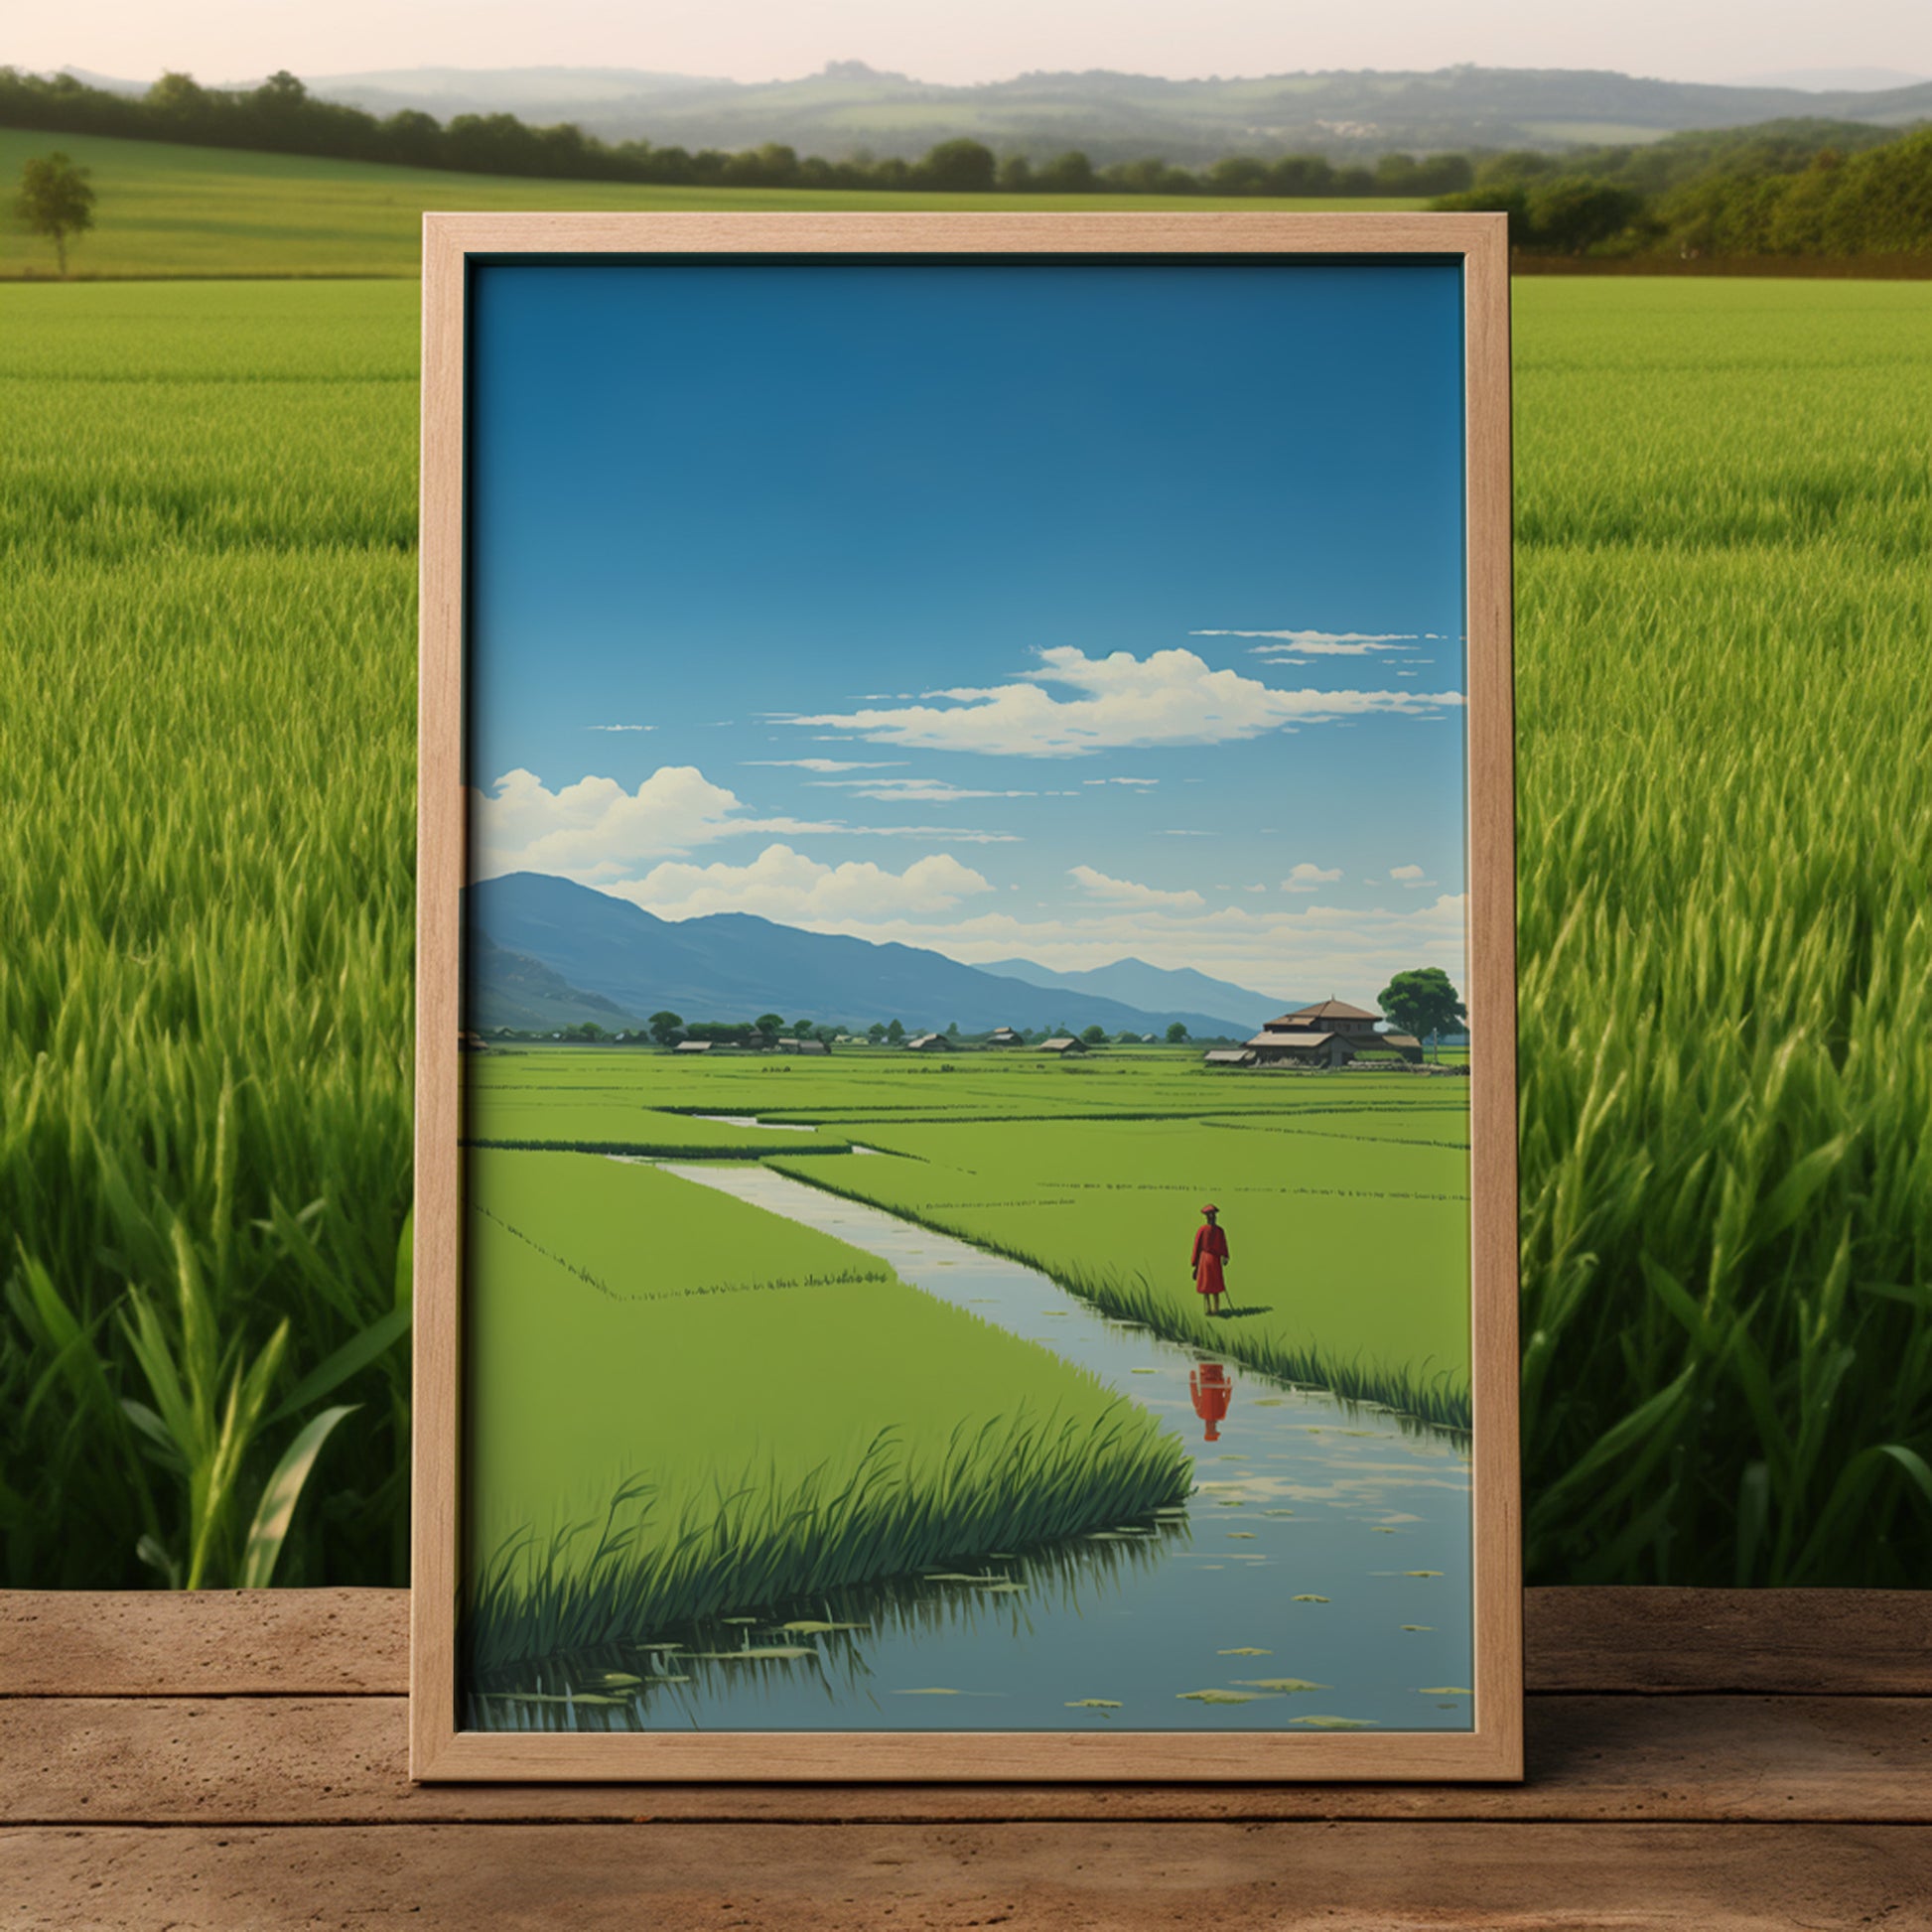 A painting of a person walking through a lush green rice field with mountains in the background, displayed on an easel.